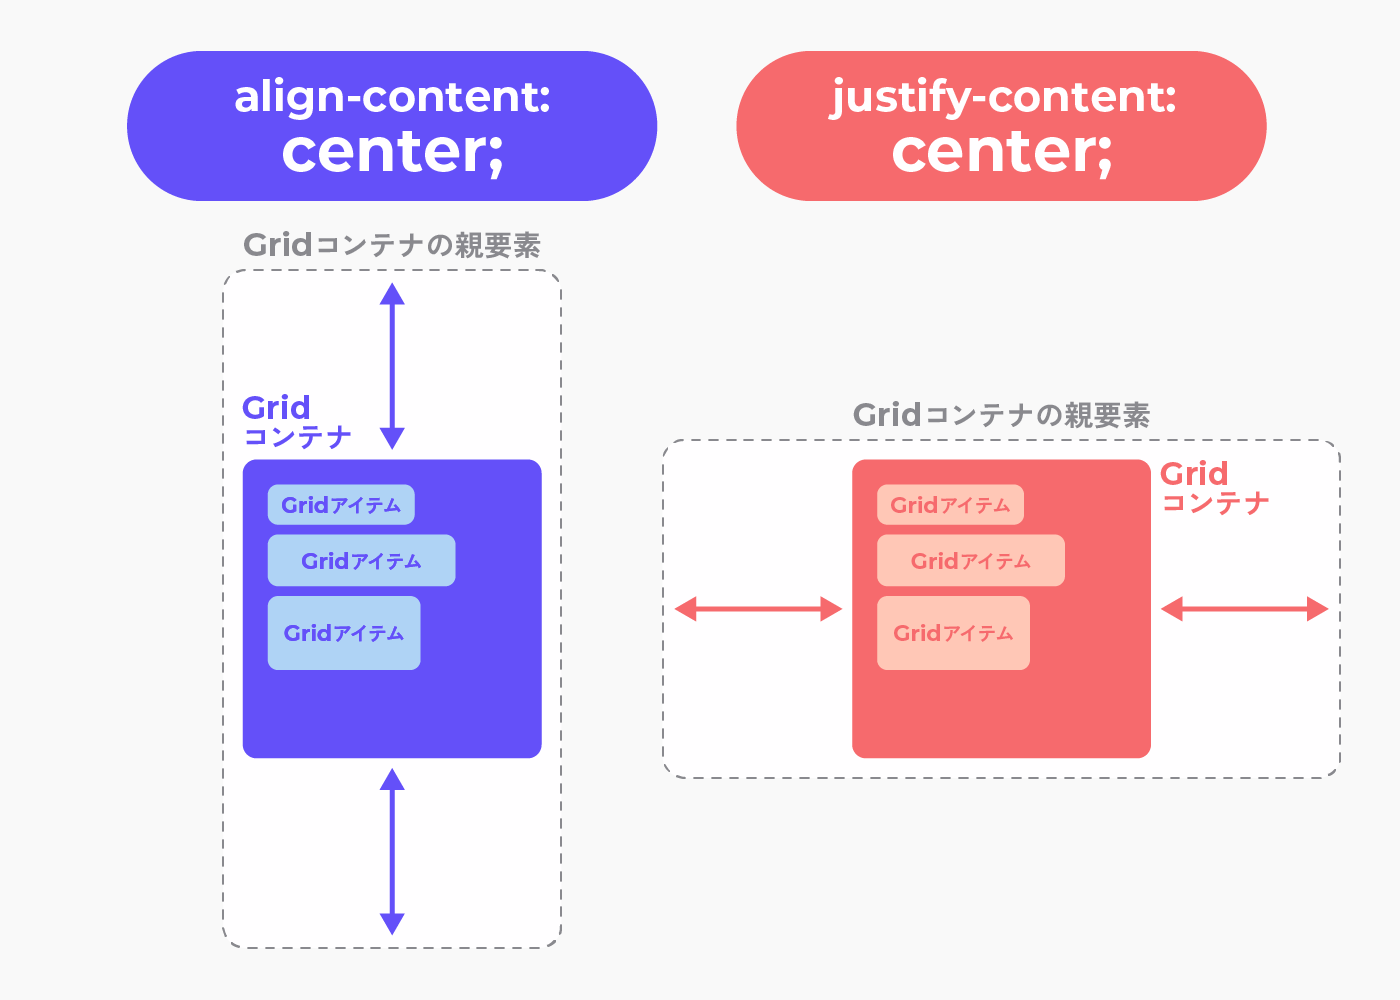 place-contentを要素が複数の場合で使う時。 align-contentはGridコンテナ全体の交差軸方向（初期値では縦）の揃え位置を指定します。 justify-contentはGridコンテナ全体の主軸方向（初期値では横）の揃え位置を指定します。